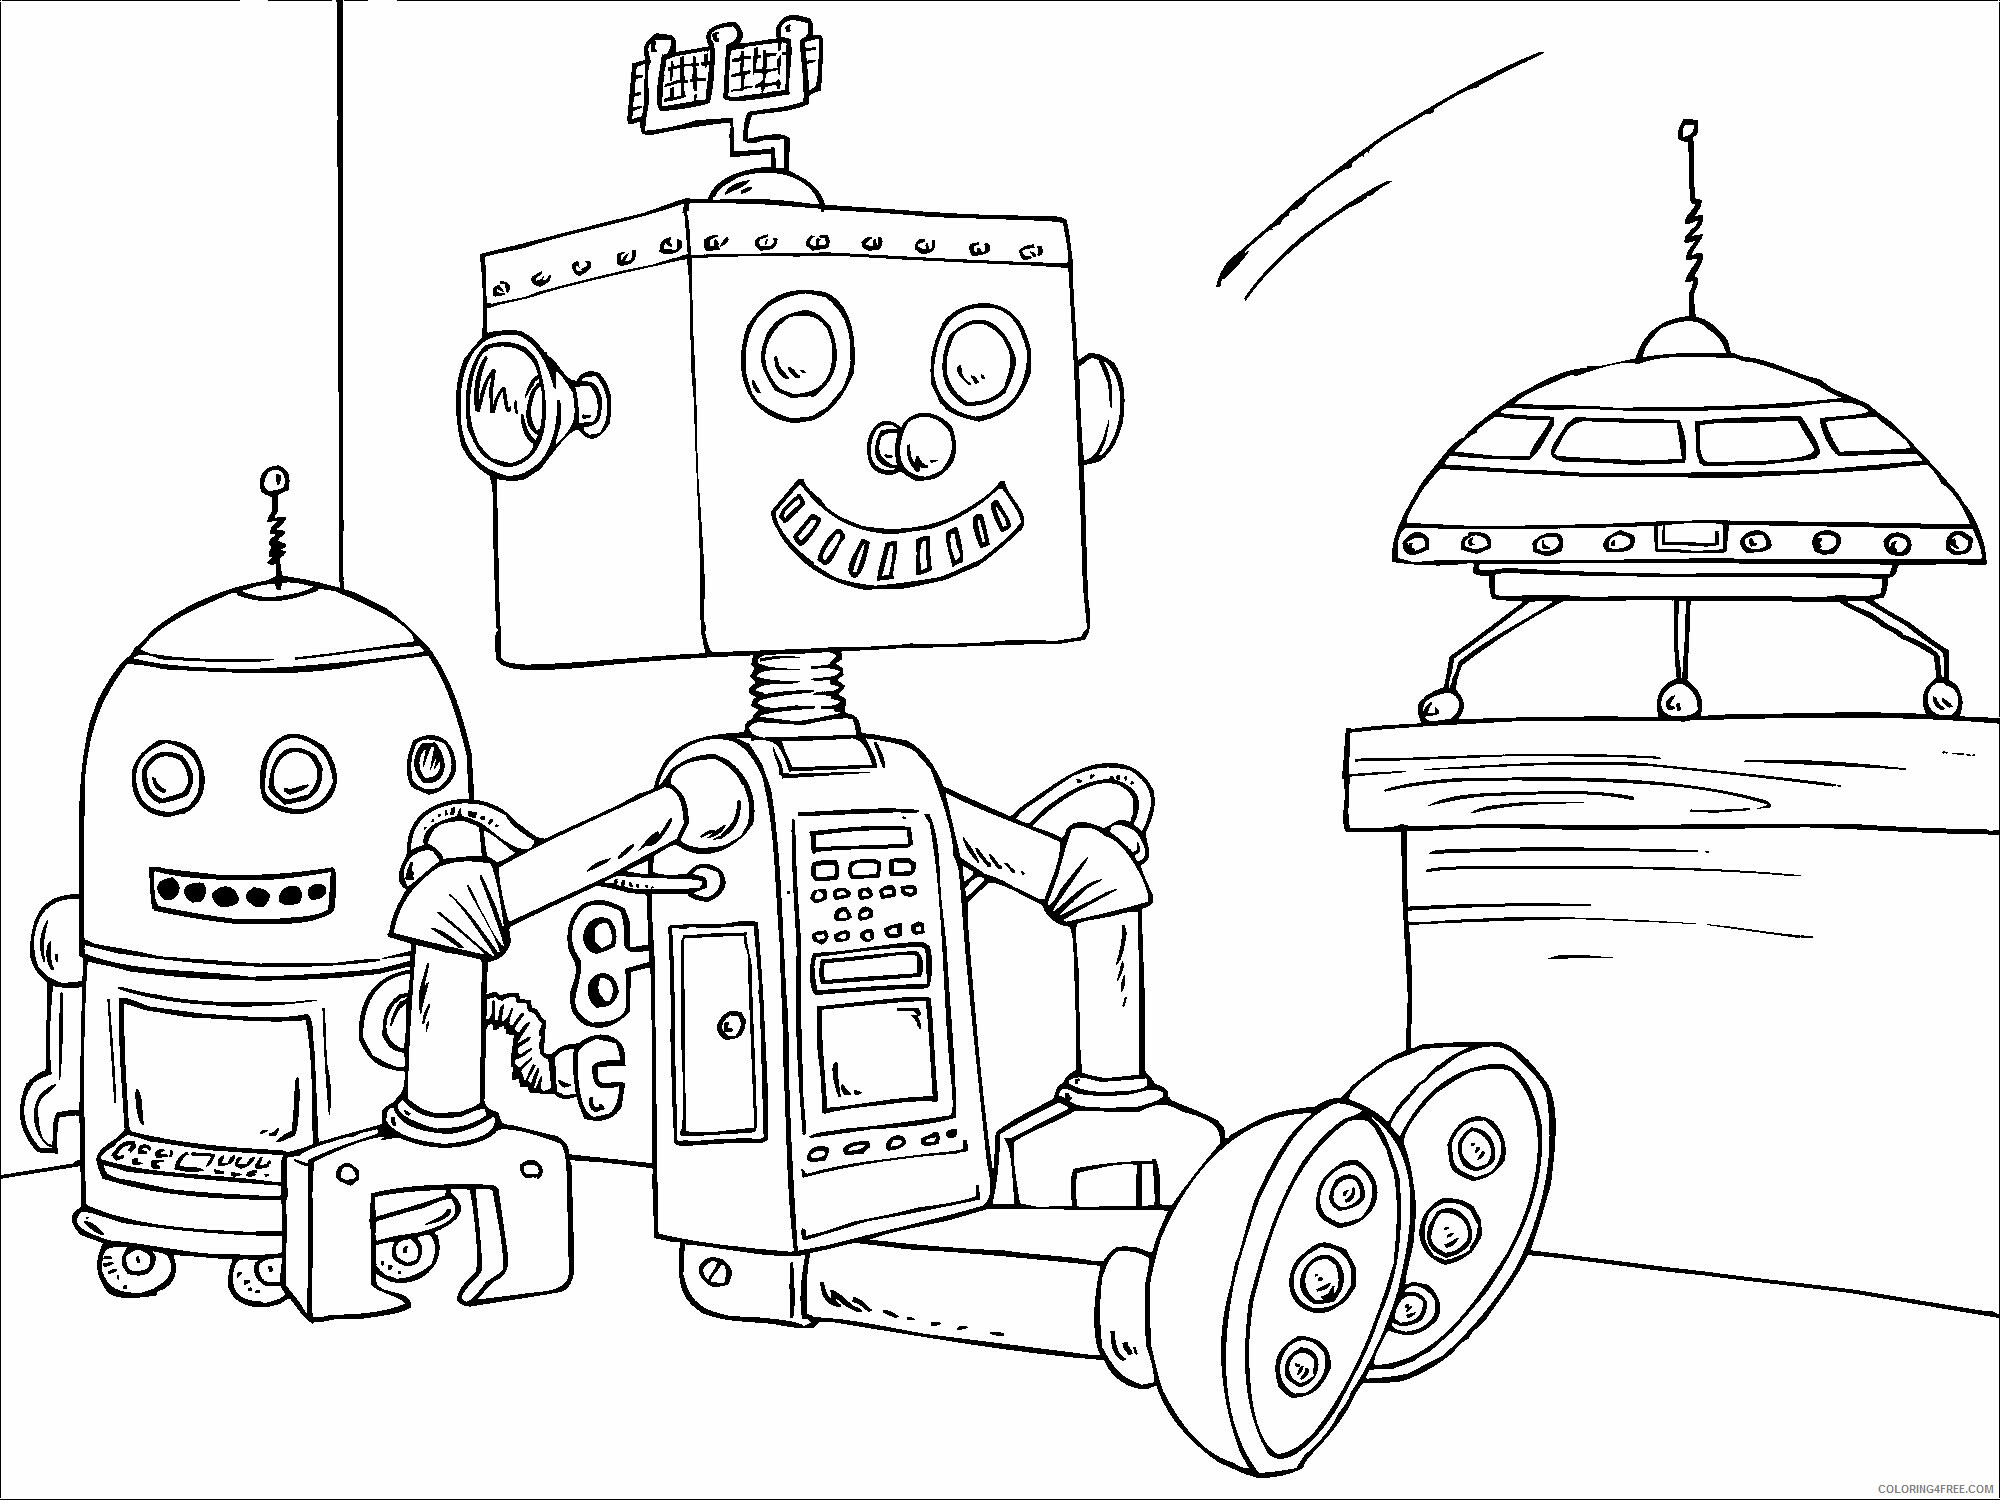 Robots Coloring Pages for boys Free Robot 2 Printable 2020 0832 Coloring4free